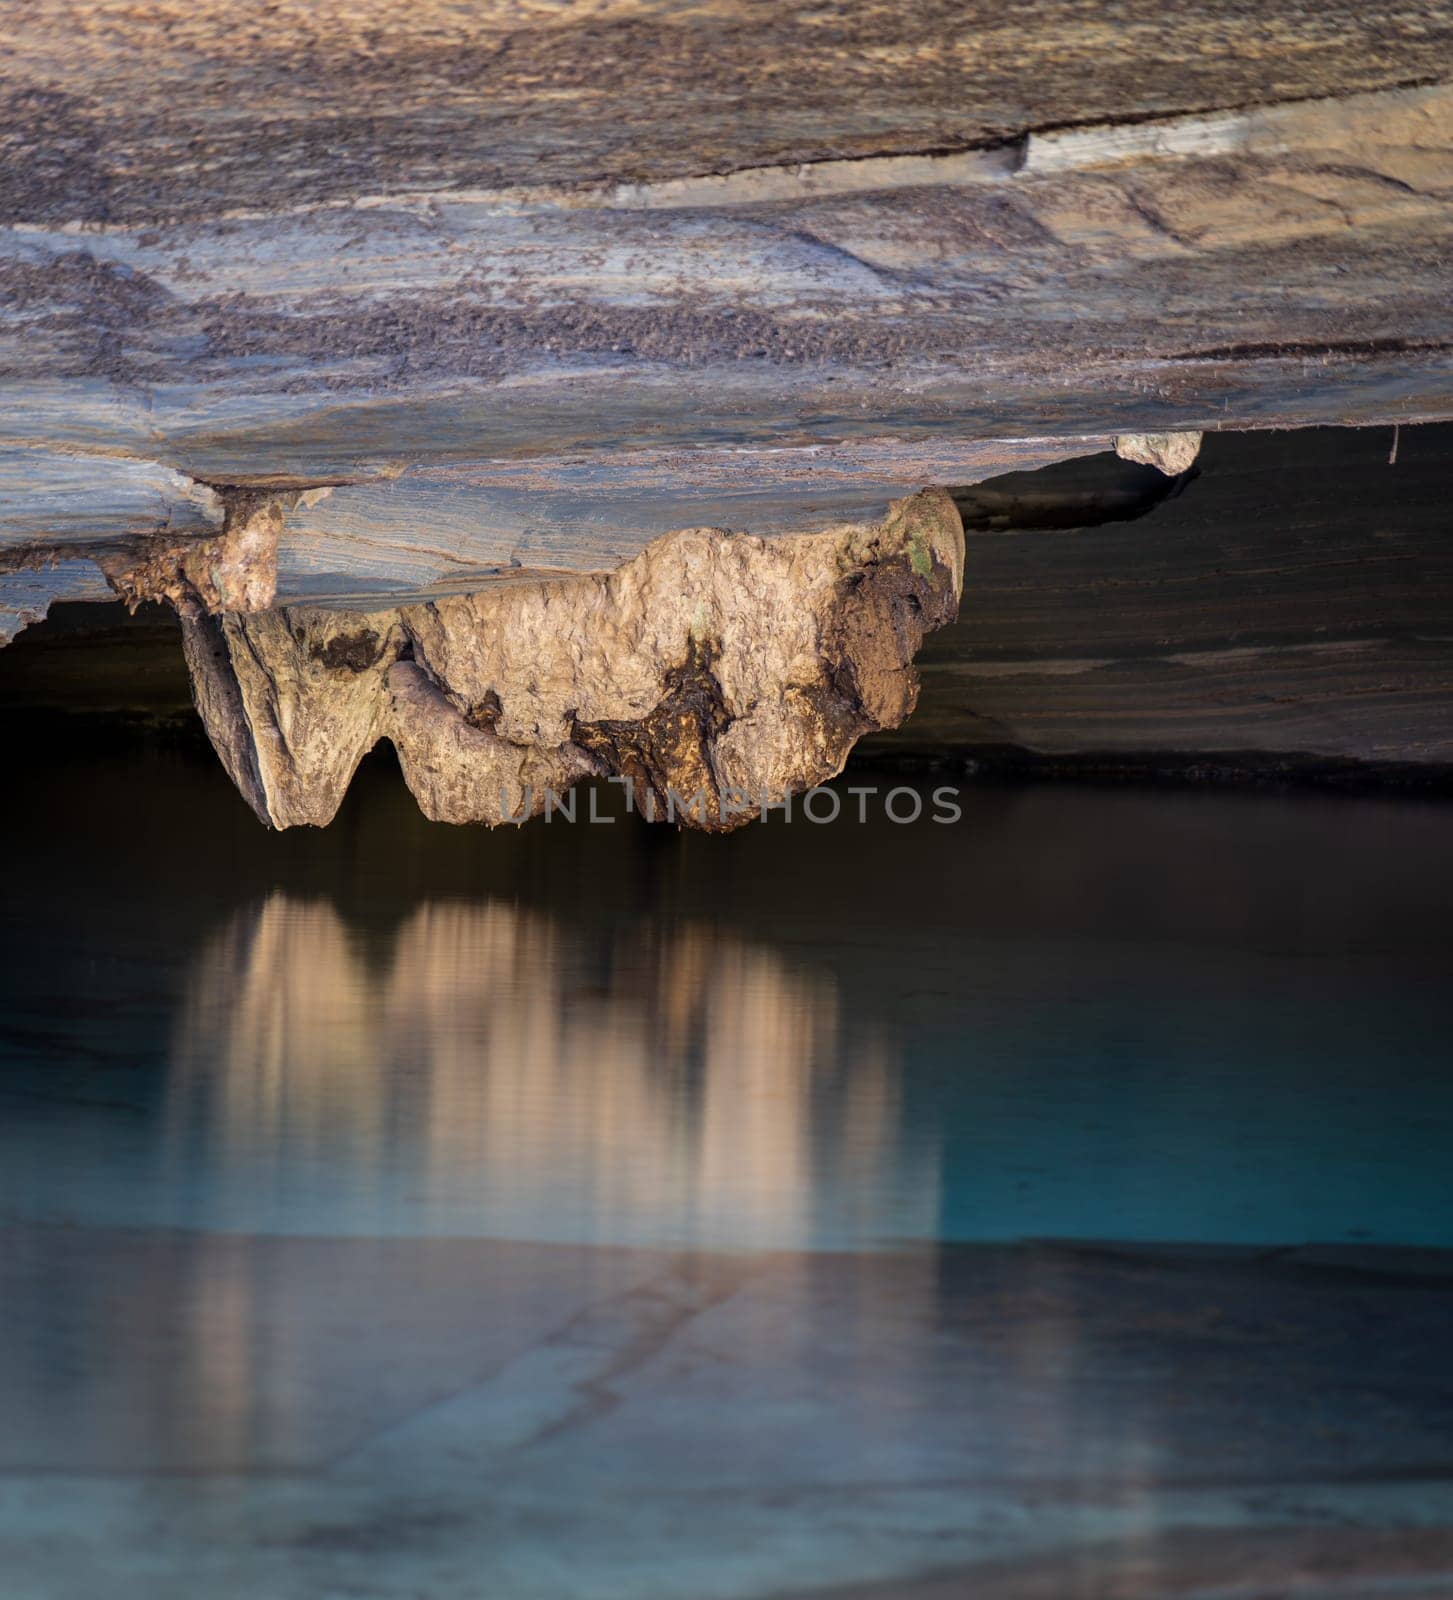 Majestic Stalactite Reflecting in Crystal Clear Lagoon Within Antiquated Cave by FerradalFCG